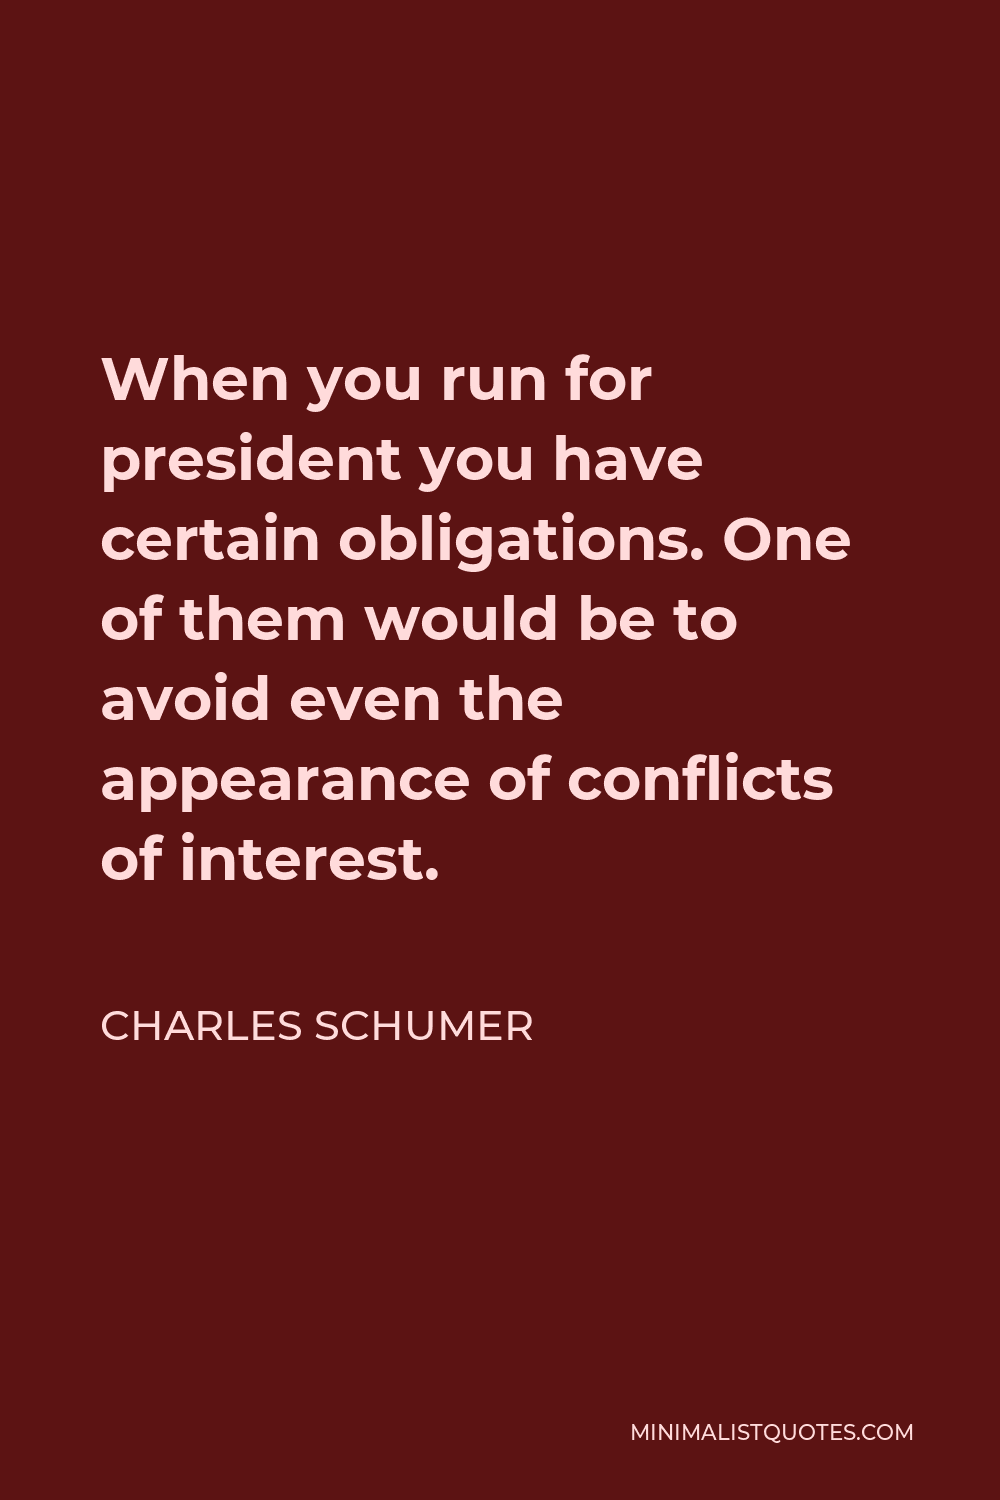 Charles Schumer Quote - When you run for president you have certain obligations. One of them would be to avoid even the appearance of conflicts of interest.